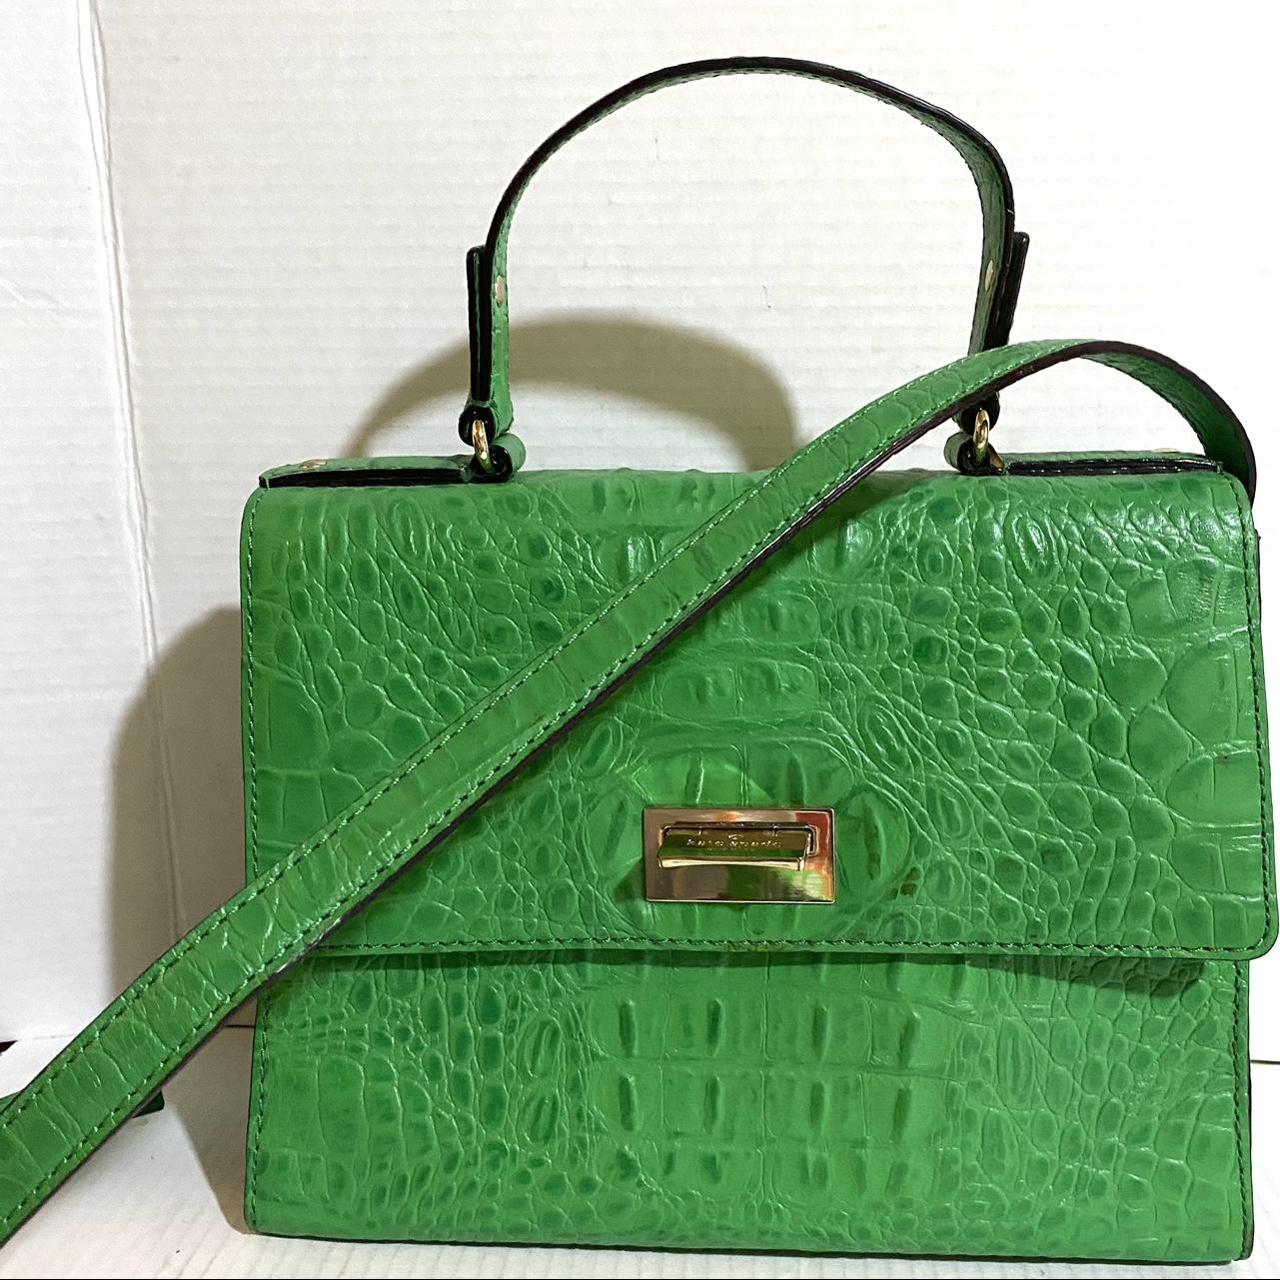 Kate Spade Spring Forward Watering Can Bag Green Leather Novelty | eBay